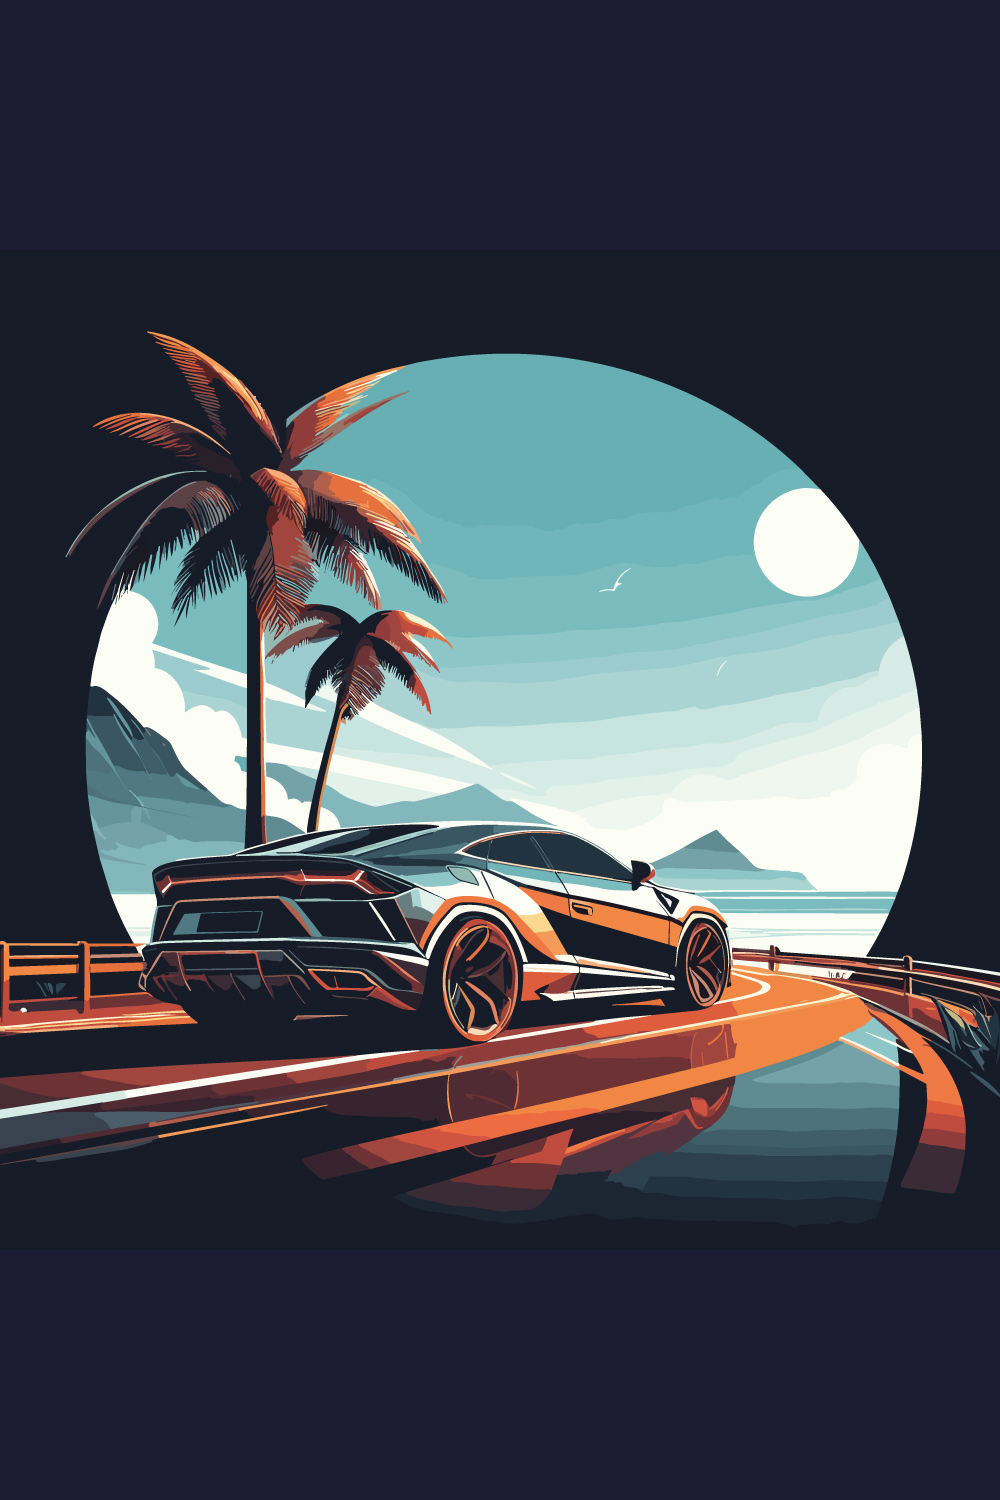 Fancy car drifting on a bautiful place pinterest preview image.